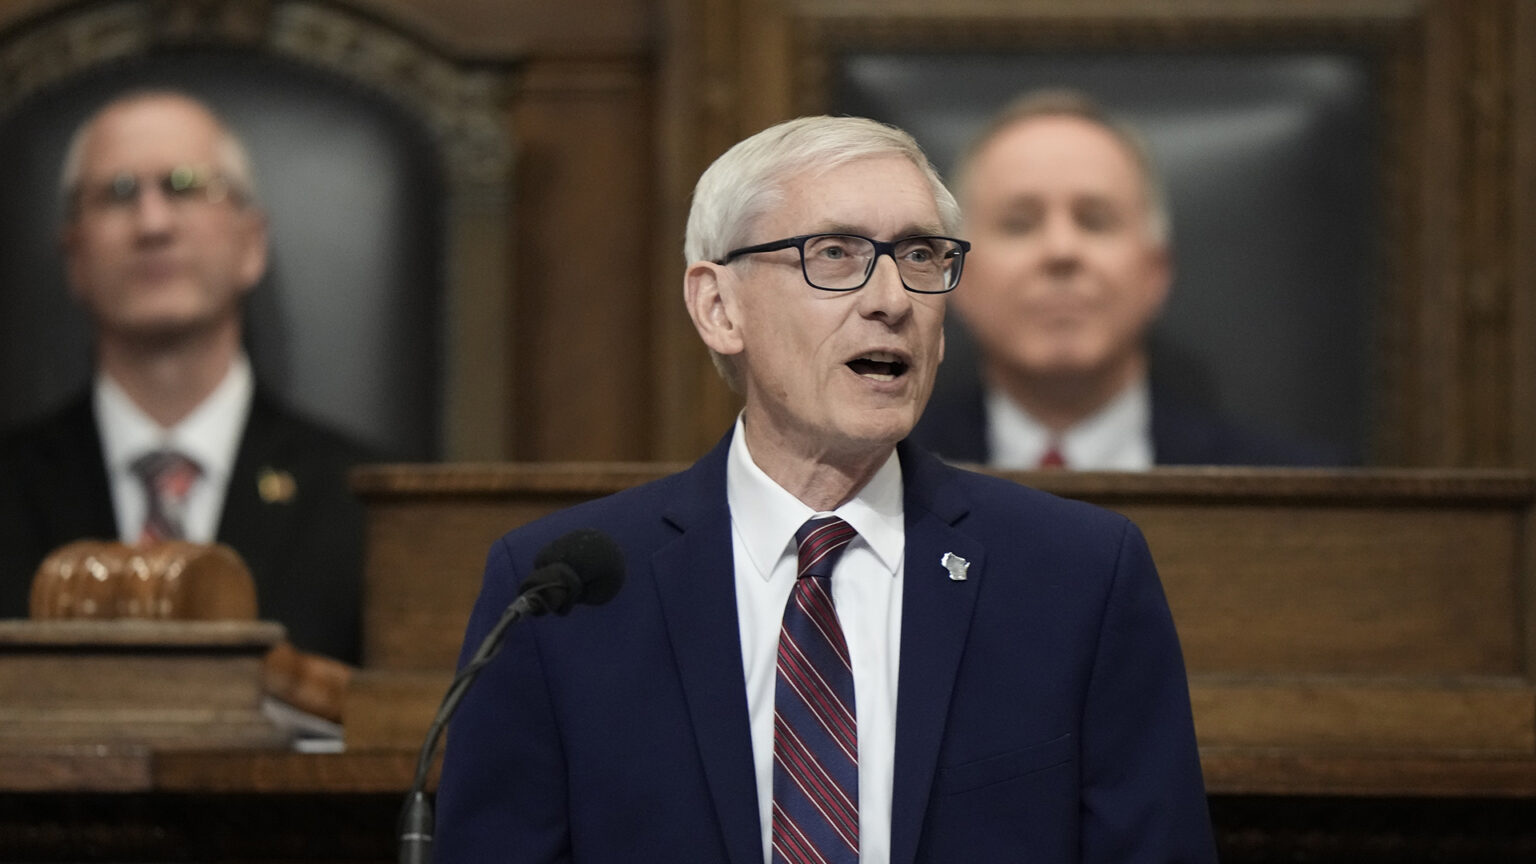 Tony Evers stands and speaks into a microphone with two other people seated behind him on a dais.